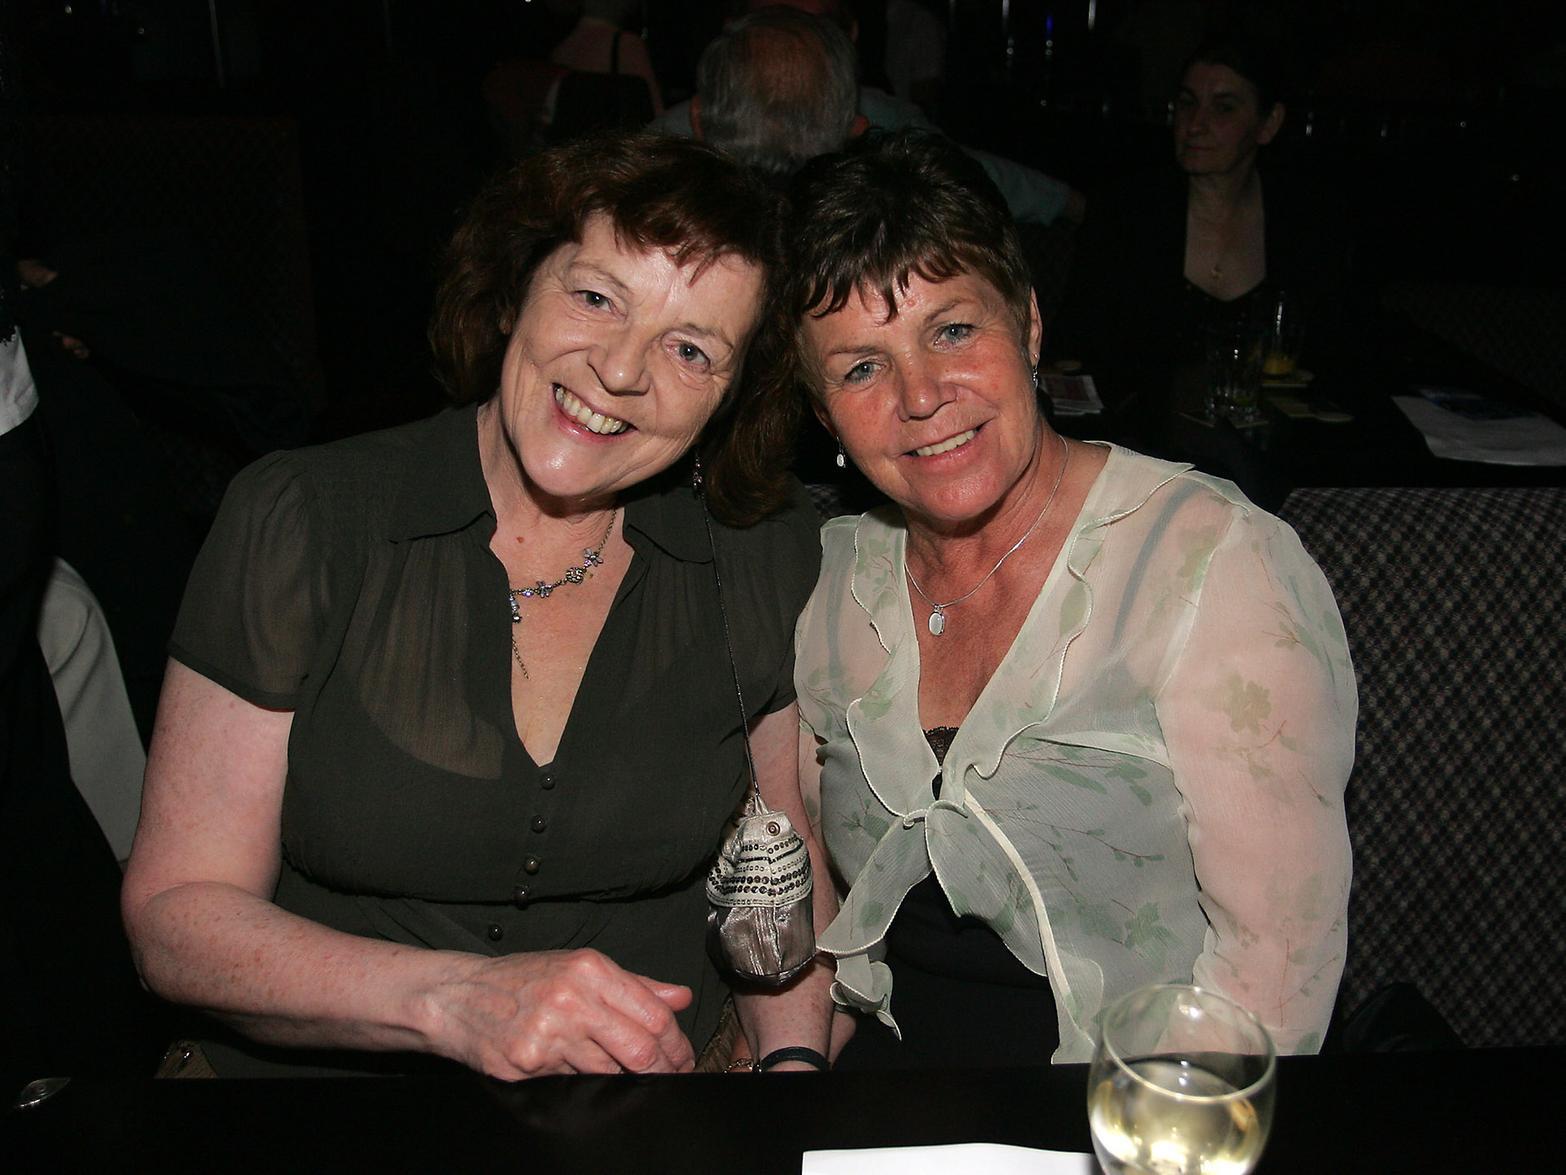 Sandra Calaghan and Patricia McDonagh enjoy a night out.